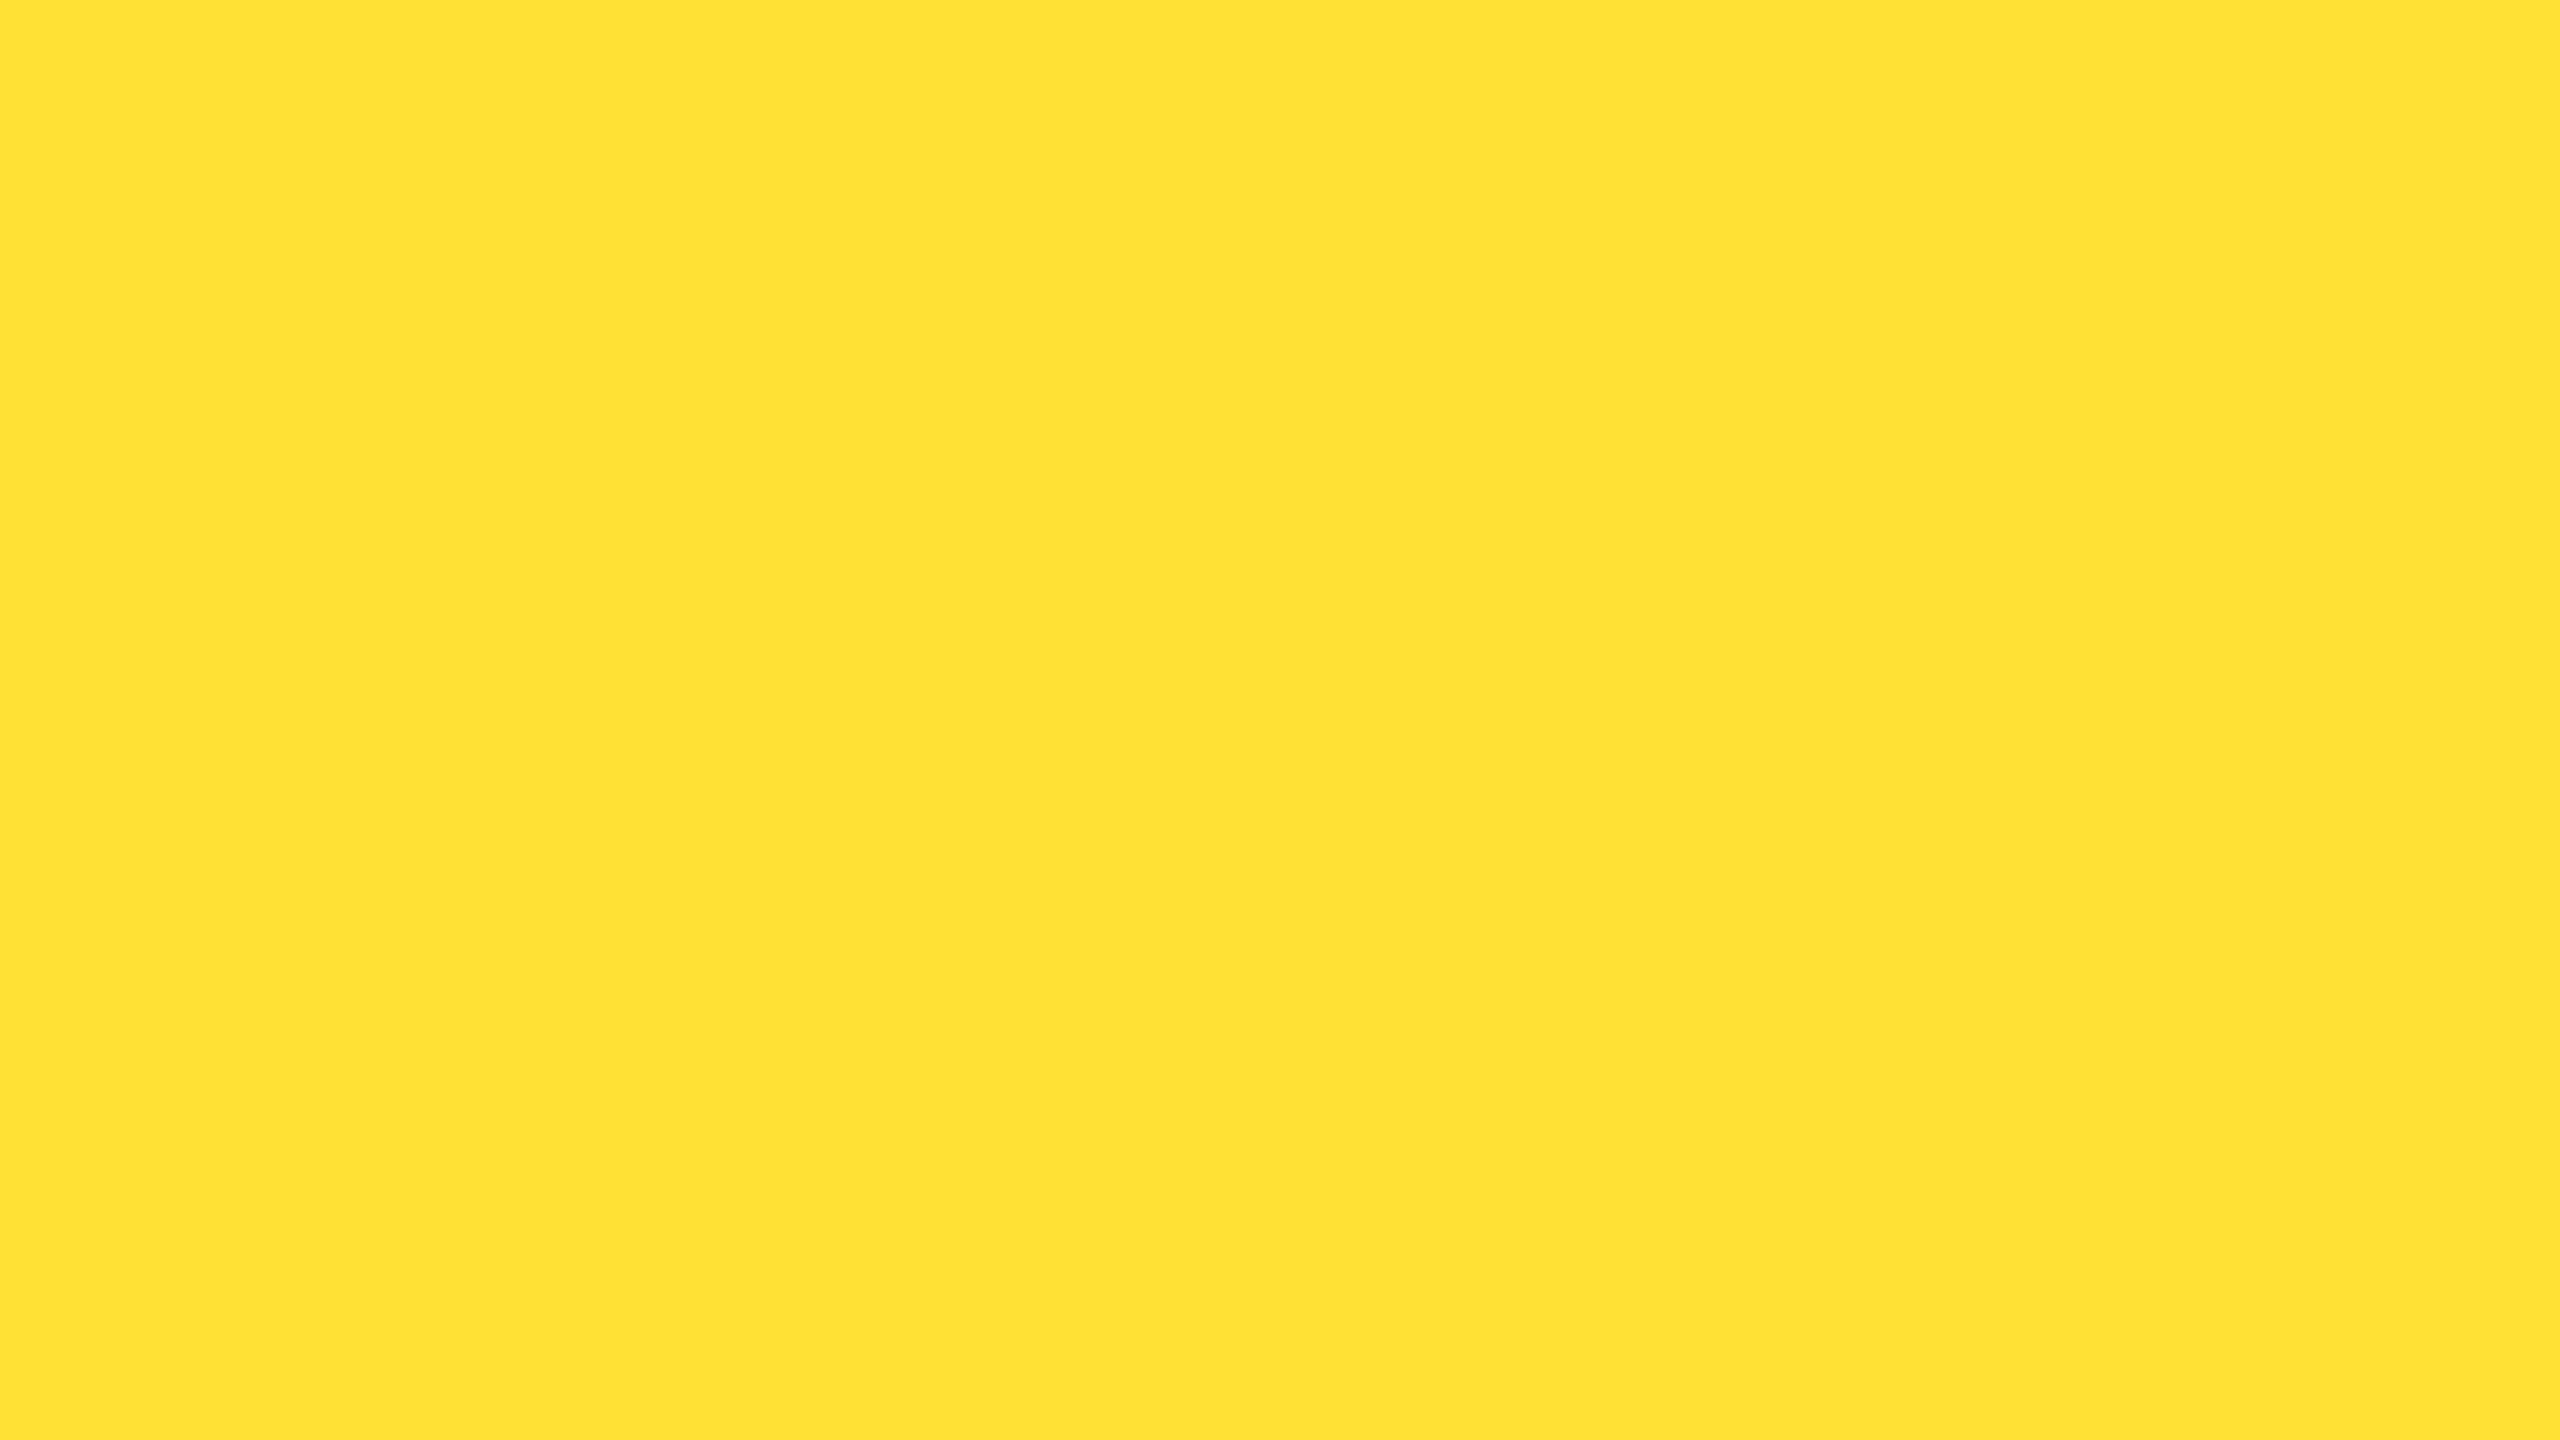 Resolution Banana Yellow Solid Color Background